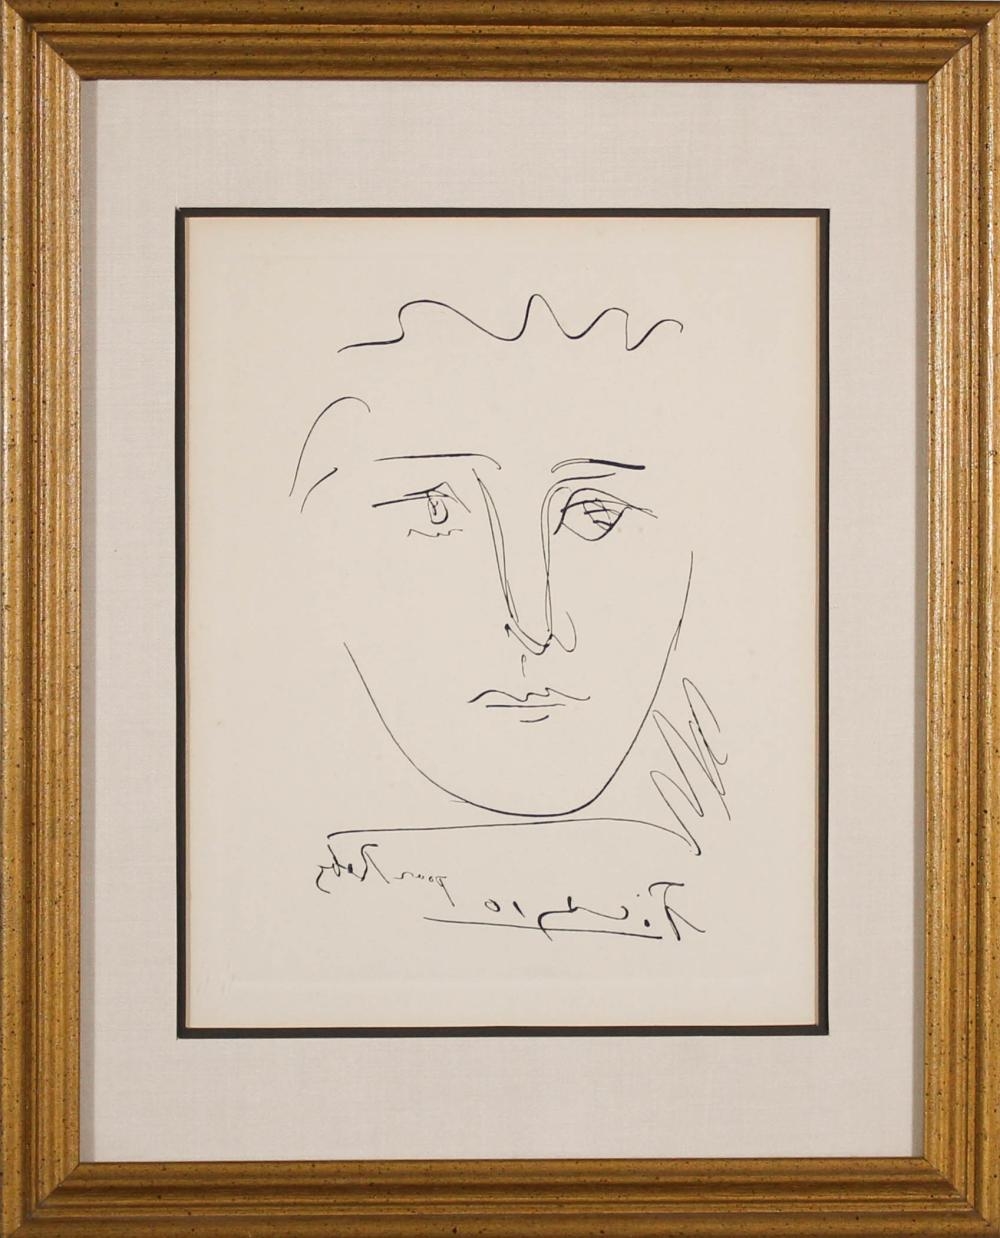 Pour Roby. - Pablo Picasso